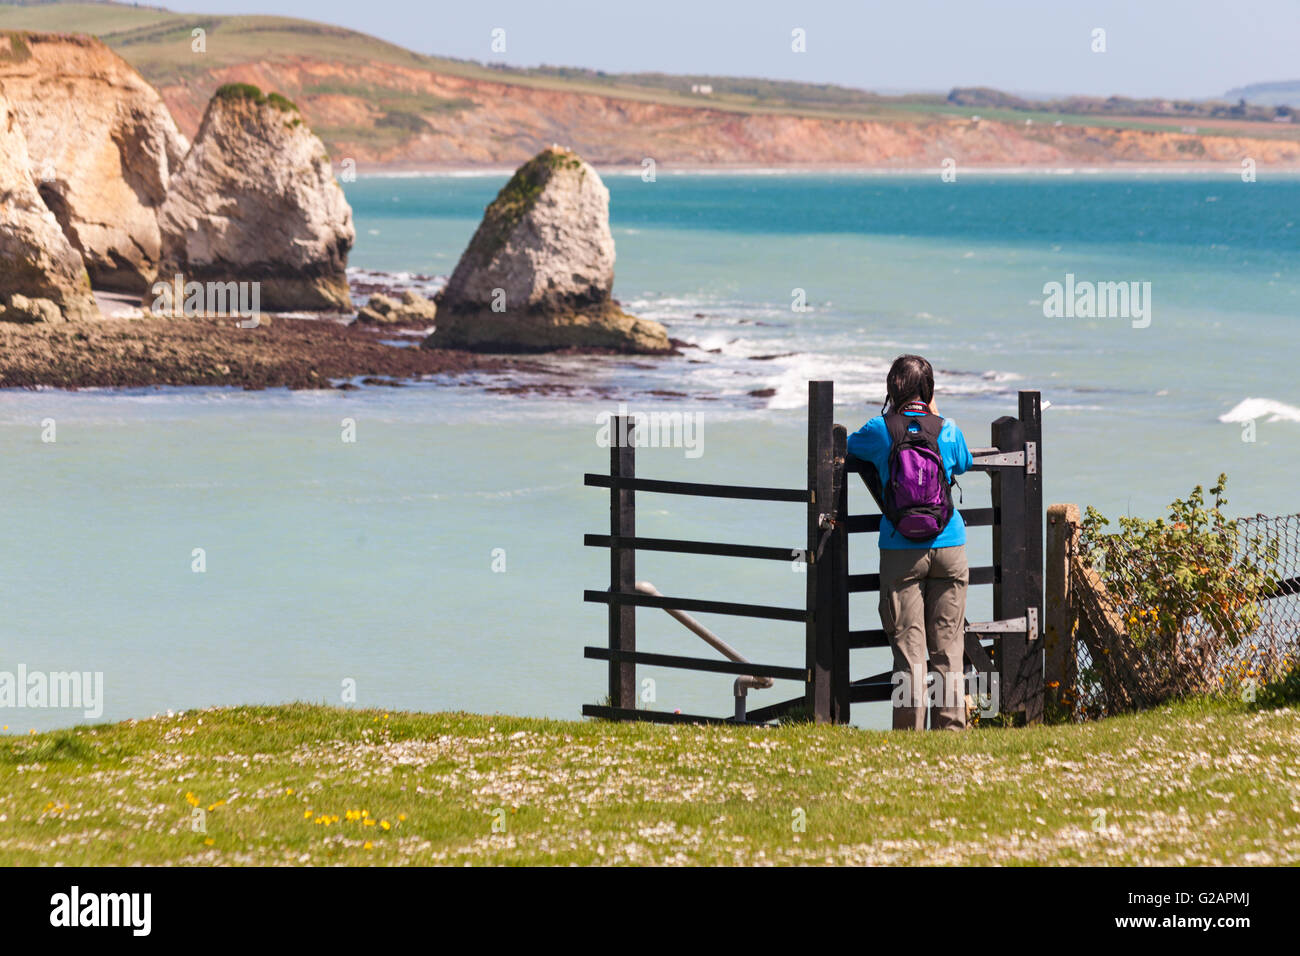 Woman leaning on stile taking a photograph of the landscape at Freshwater Bay, Isle of Wight, Hampshire UK in May - seastacks sea stacks Stock Photo